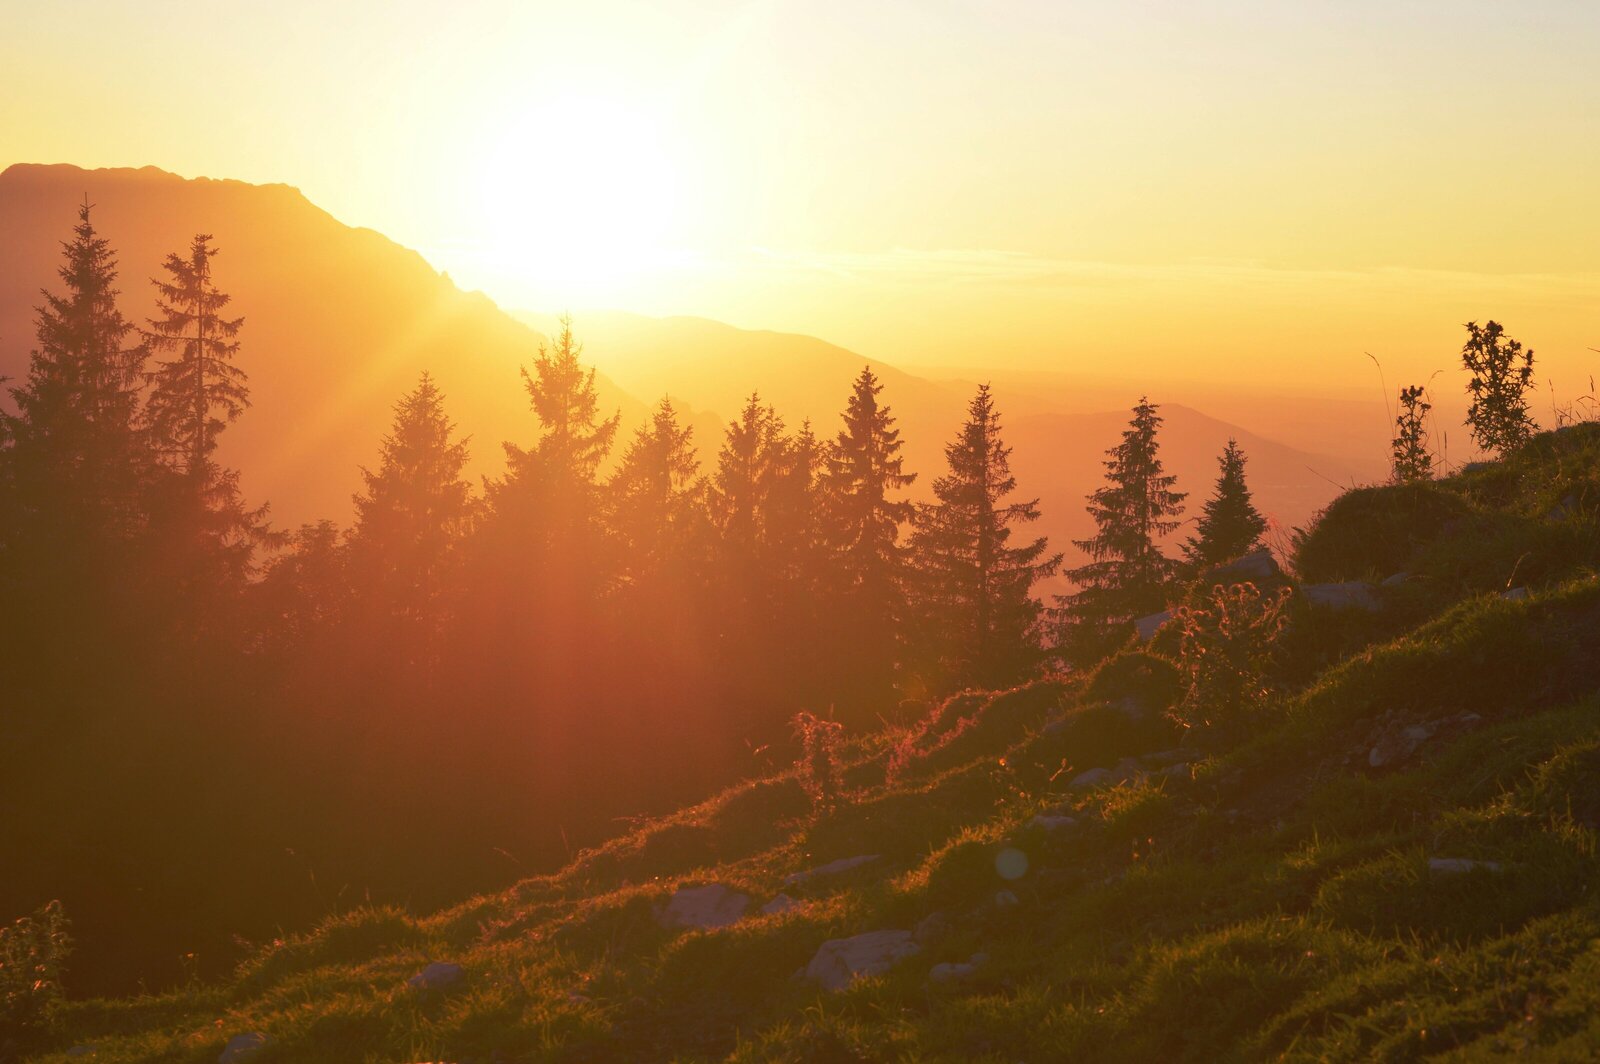 Image of a sunset over a mountain with trees.